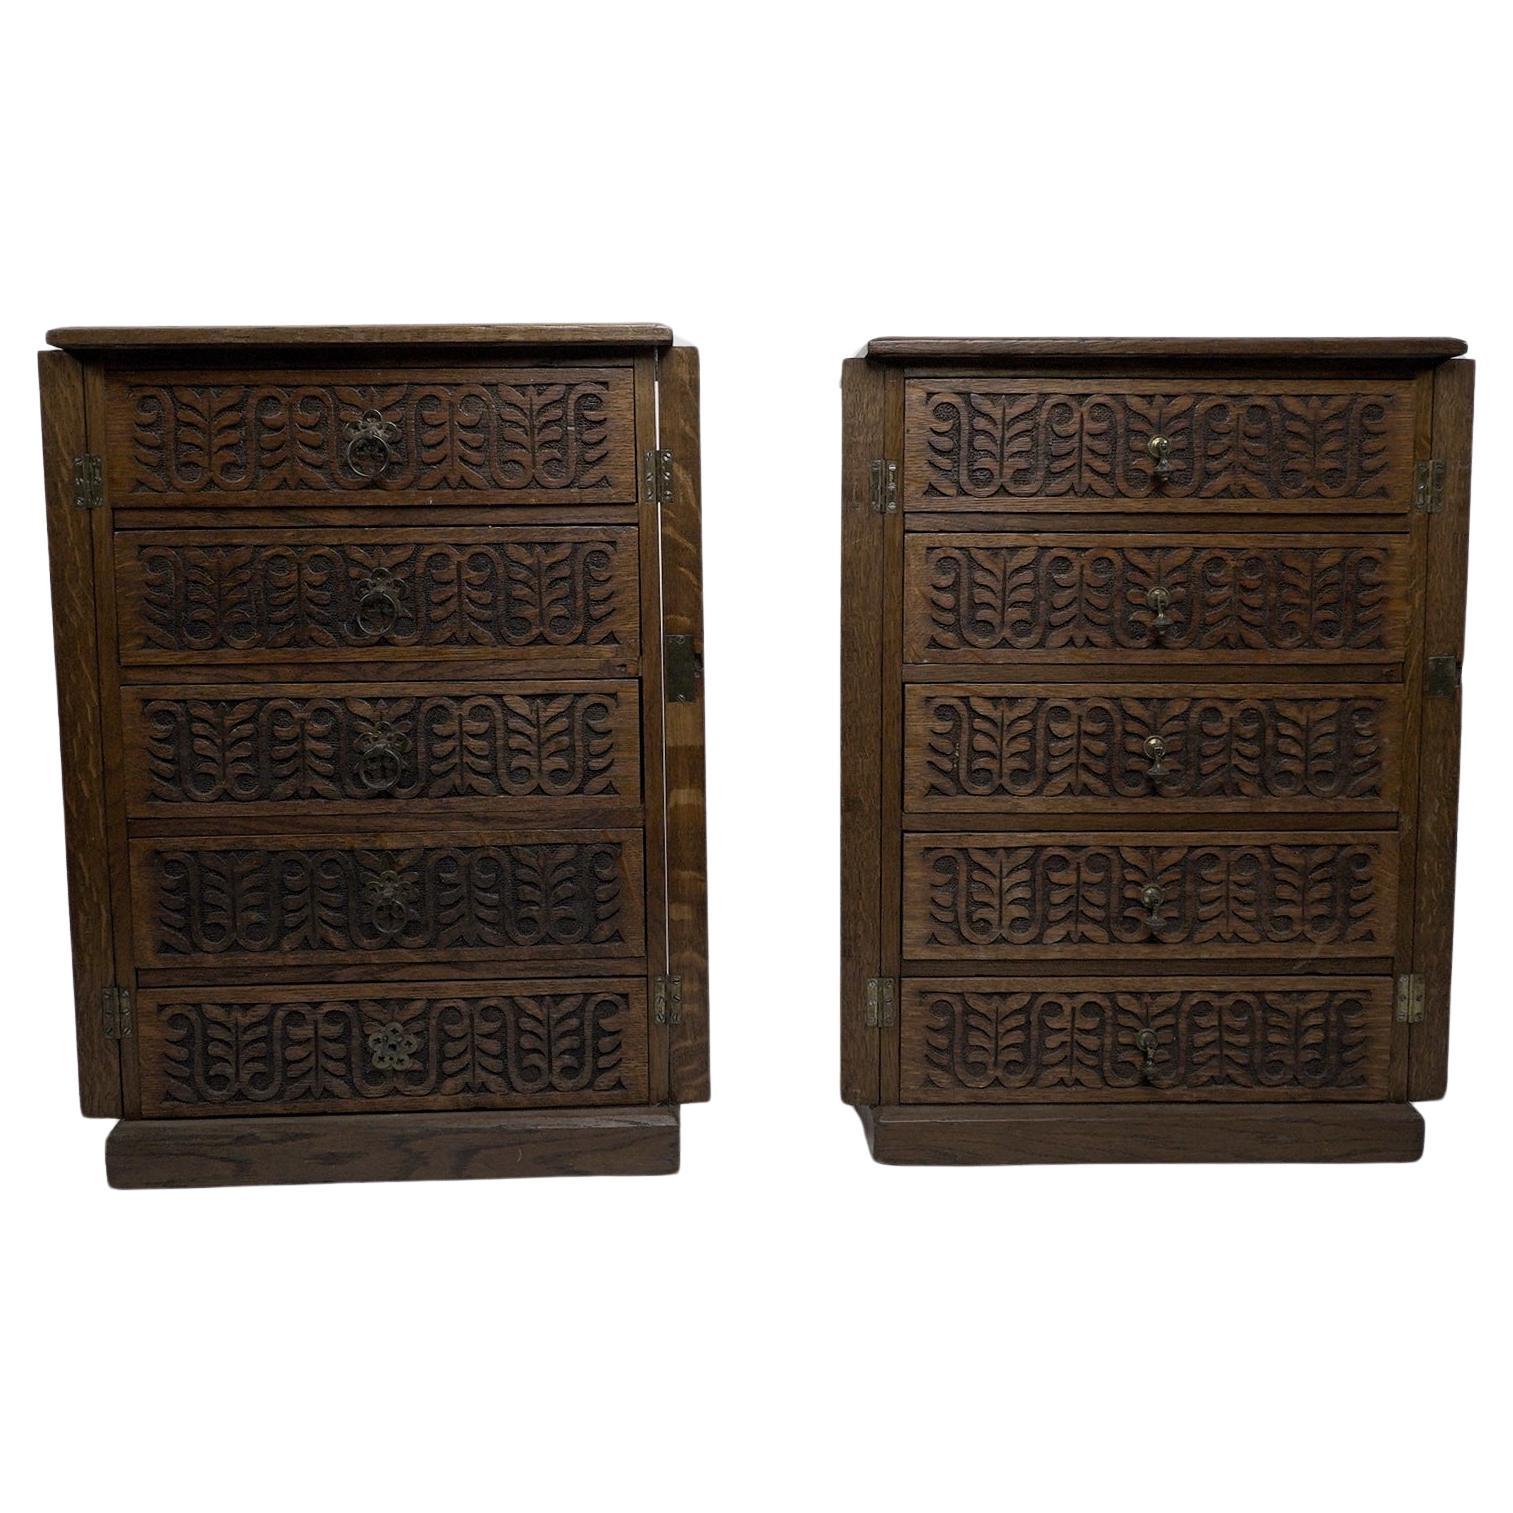 A pair of small Aesthetic Movement oak sets of drawers with lockable side flaps. For Sale